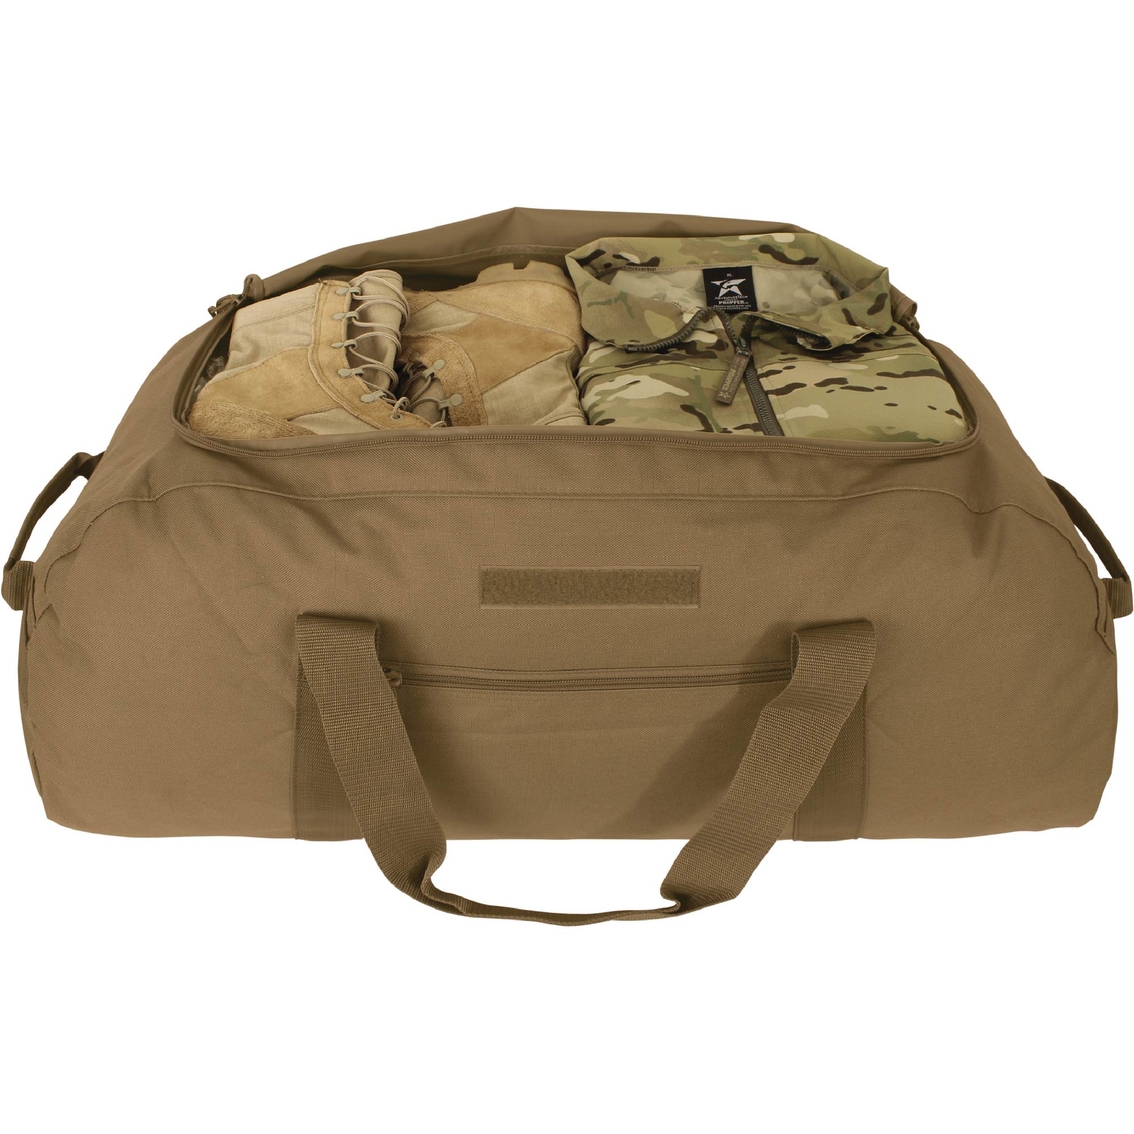 Mercury Tactical Gear Giant Duffel Backpack - Image 3 of 4